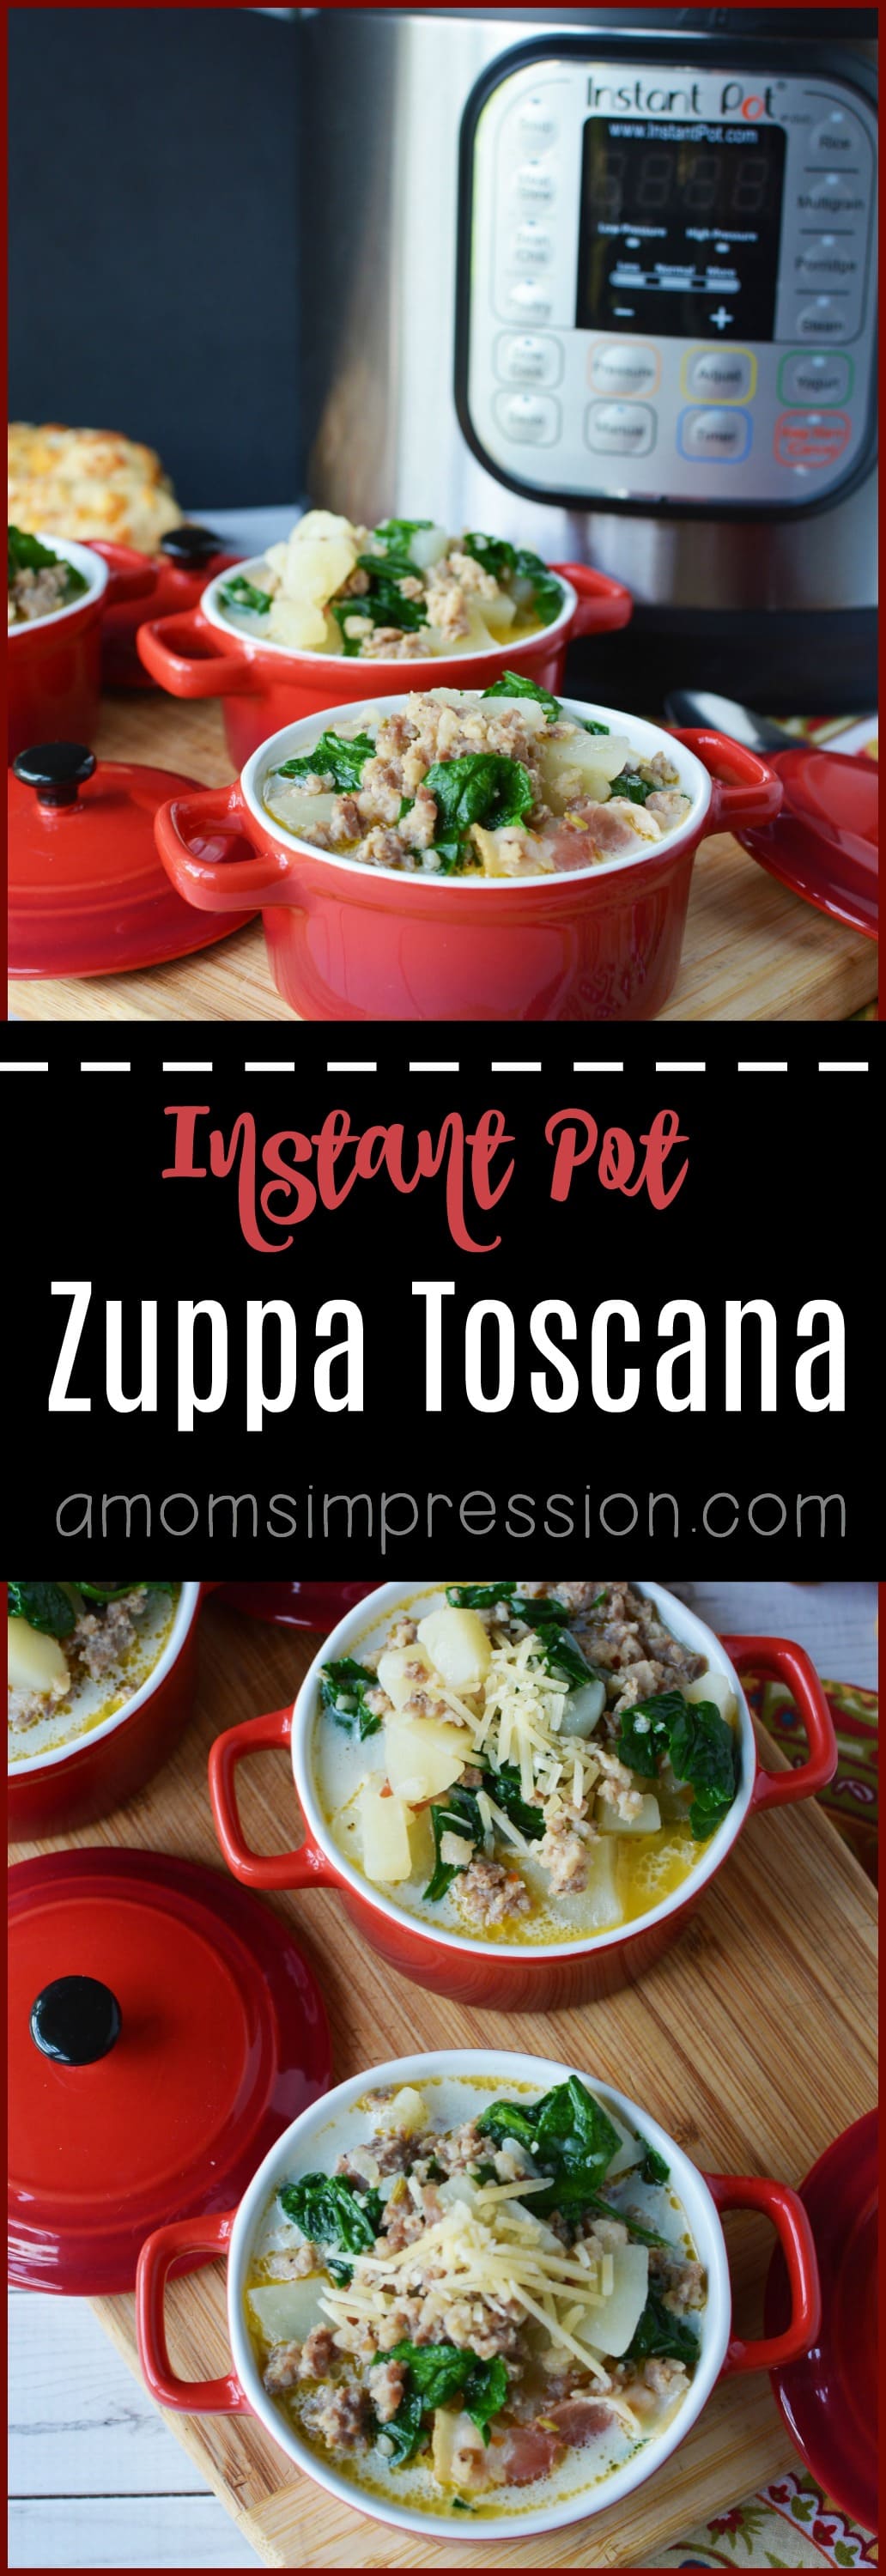 This Instant Pot Zuppa Toscana is an Olive Garden copycat recipe that can be made in 5 minutes in your pressure cooker. It is the best Zuppa Toscana soup I have tried.